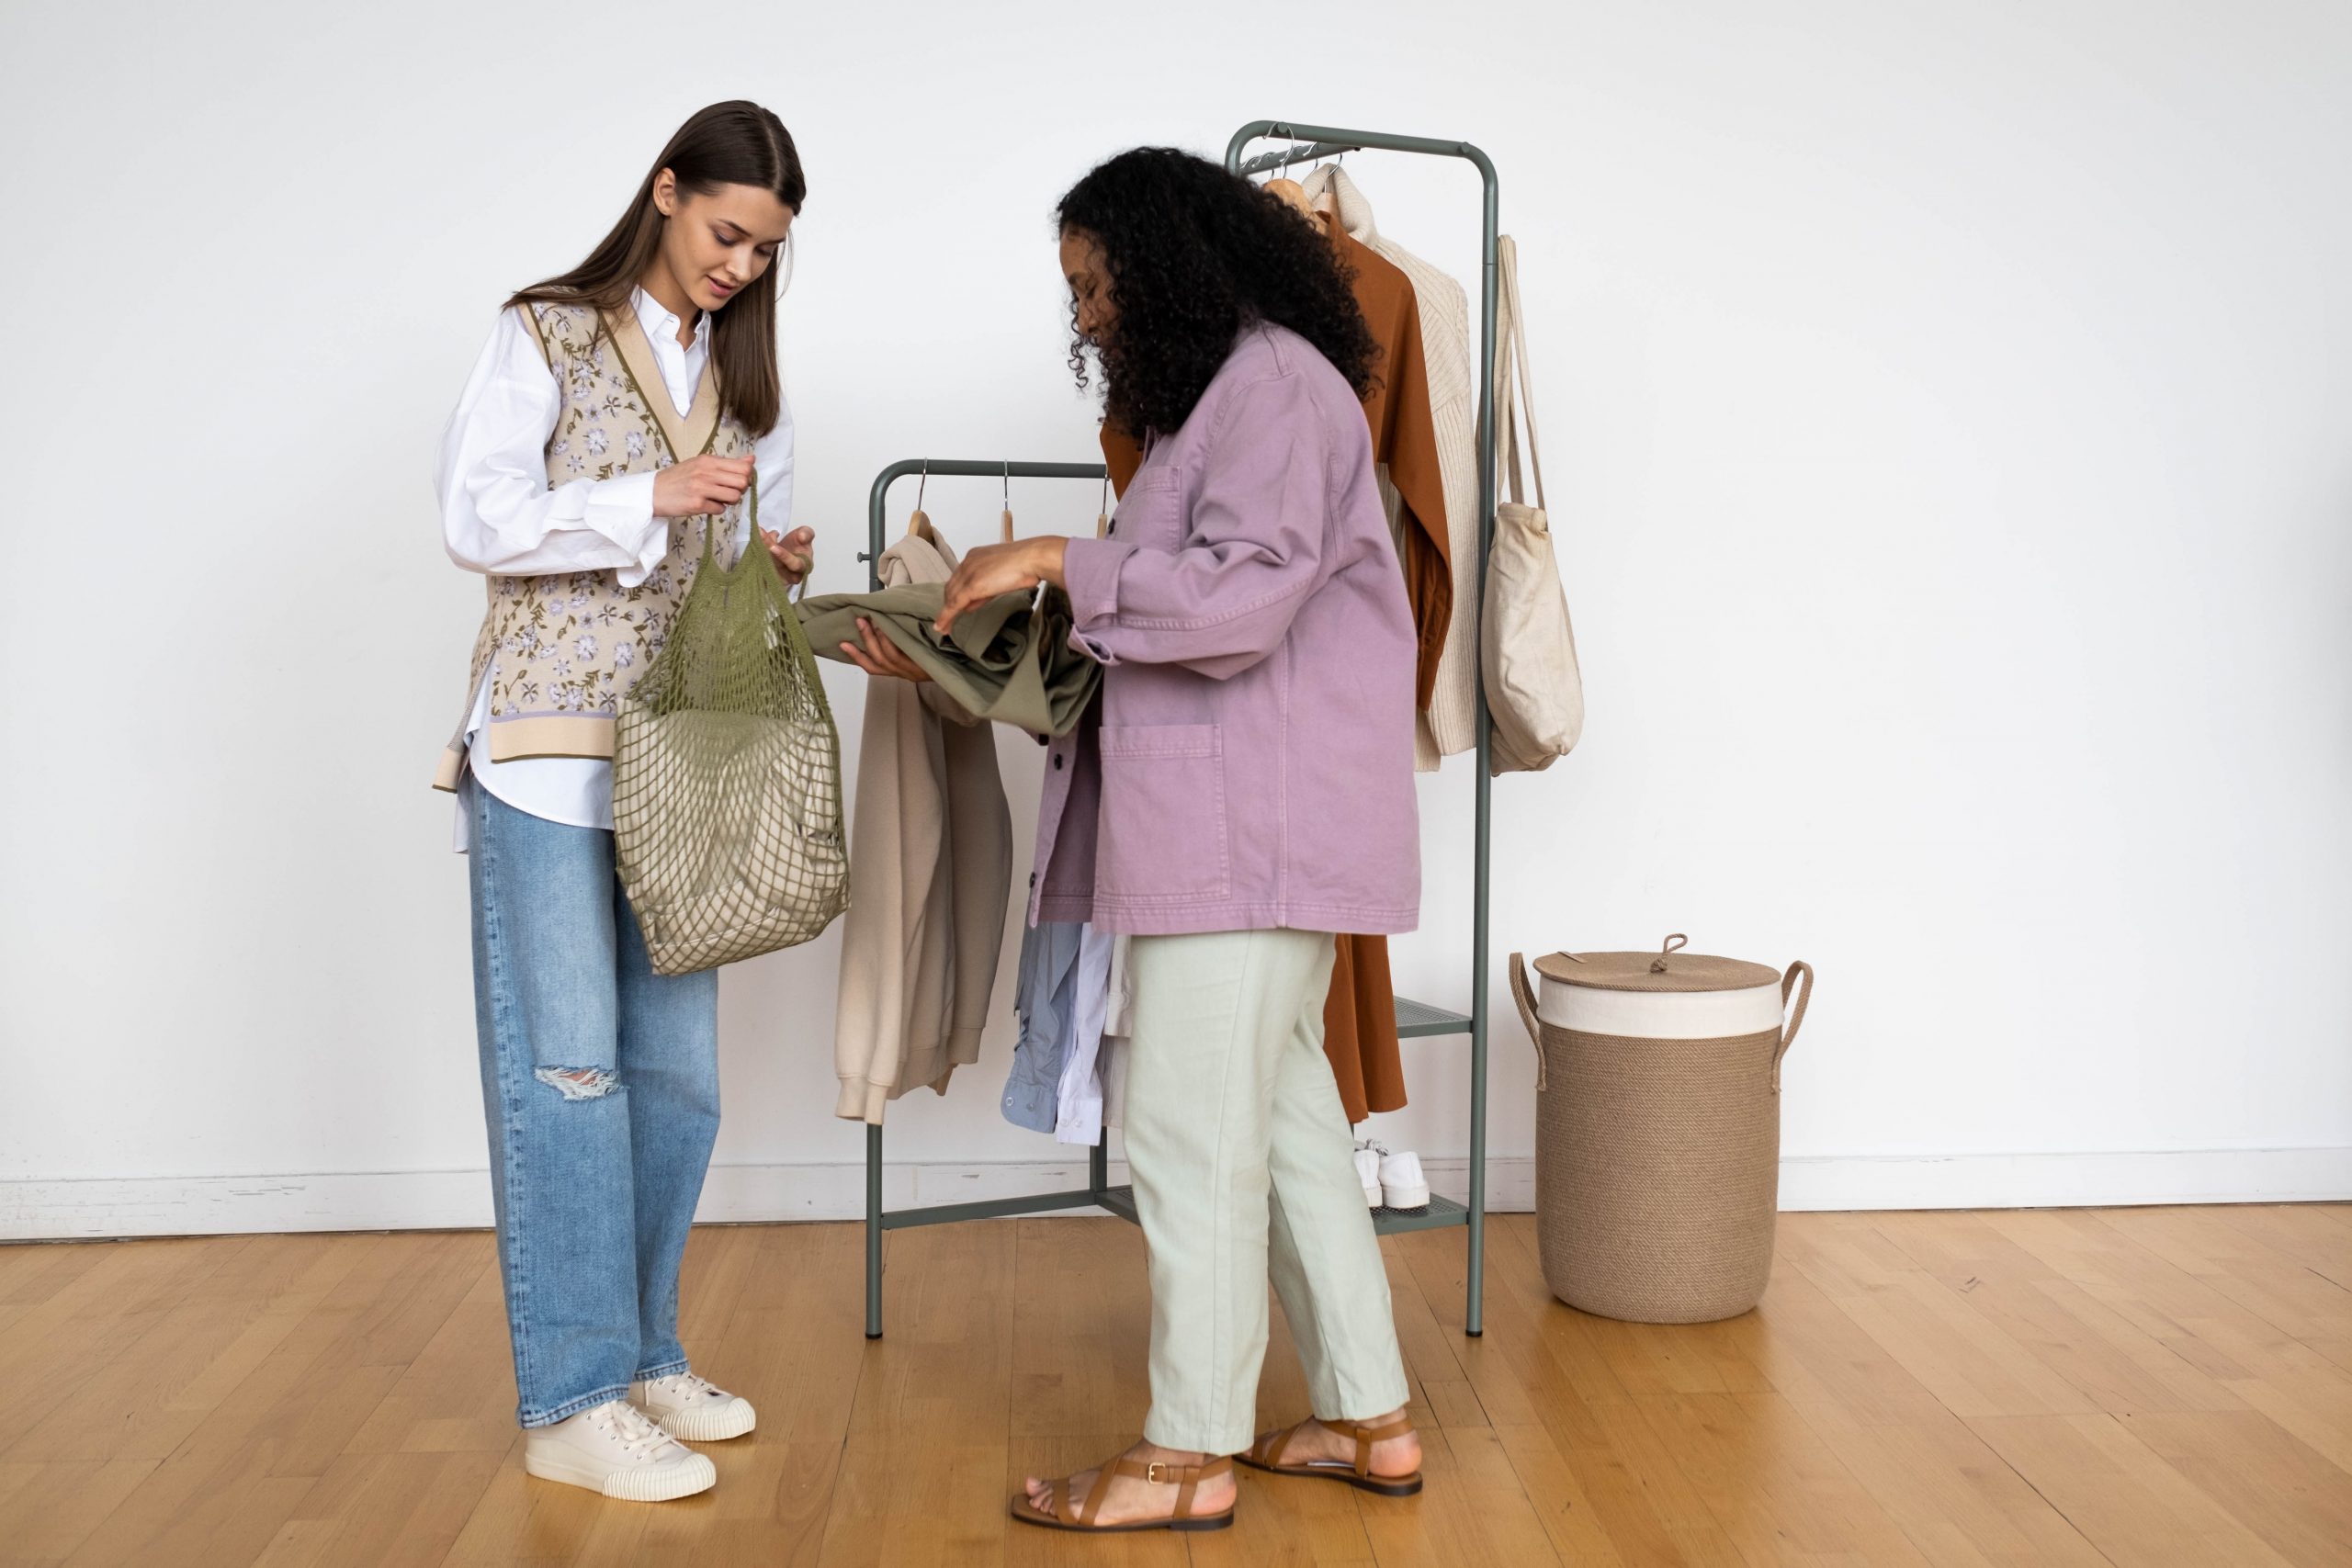 Two women shopping from sustainable companies.